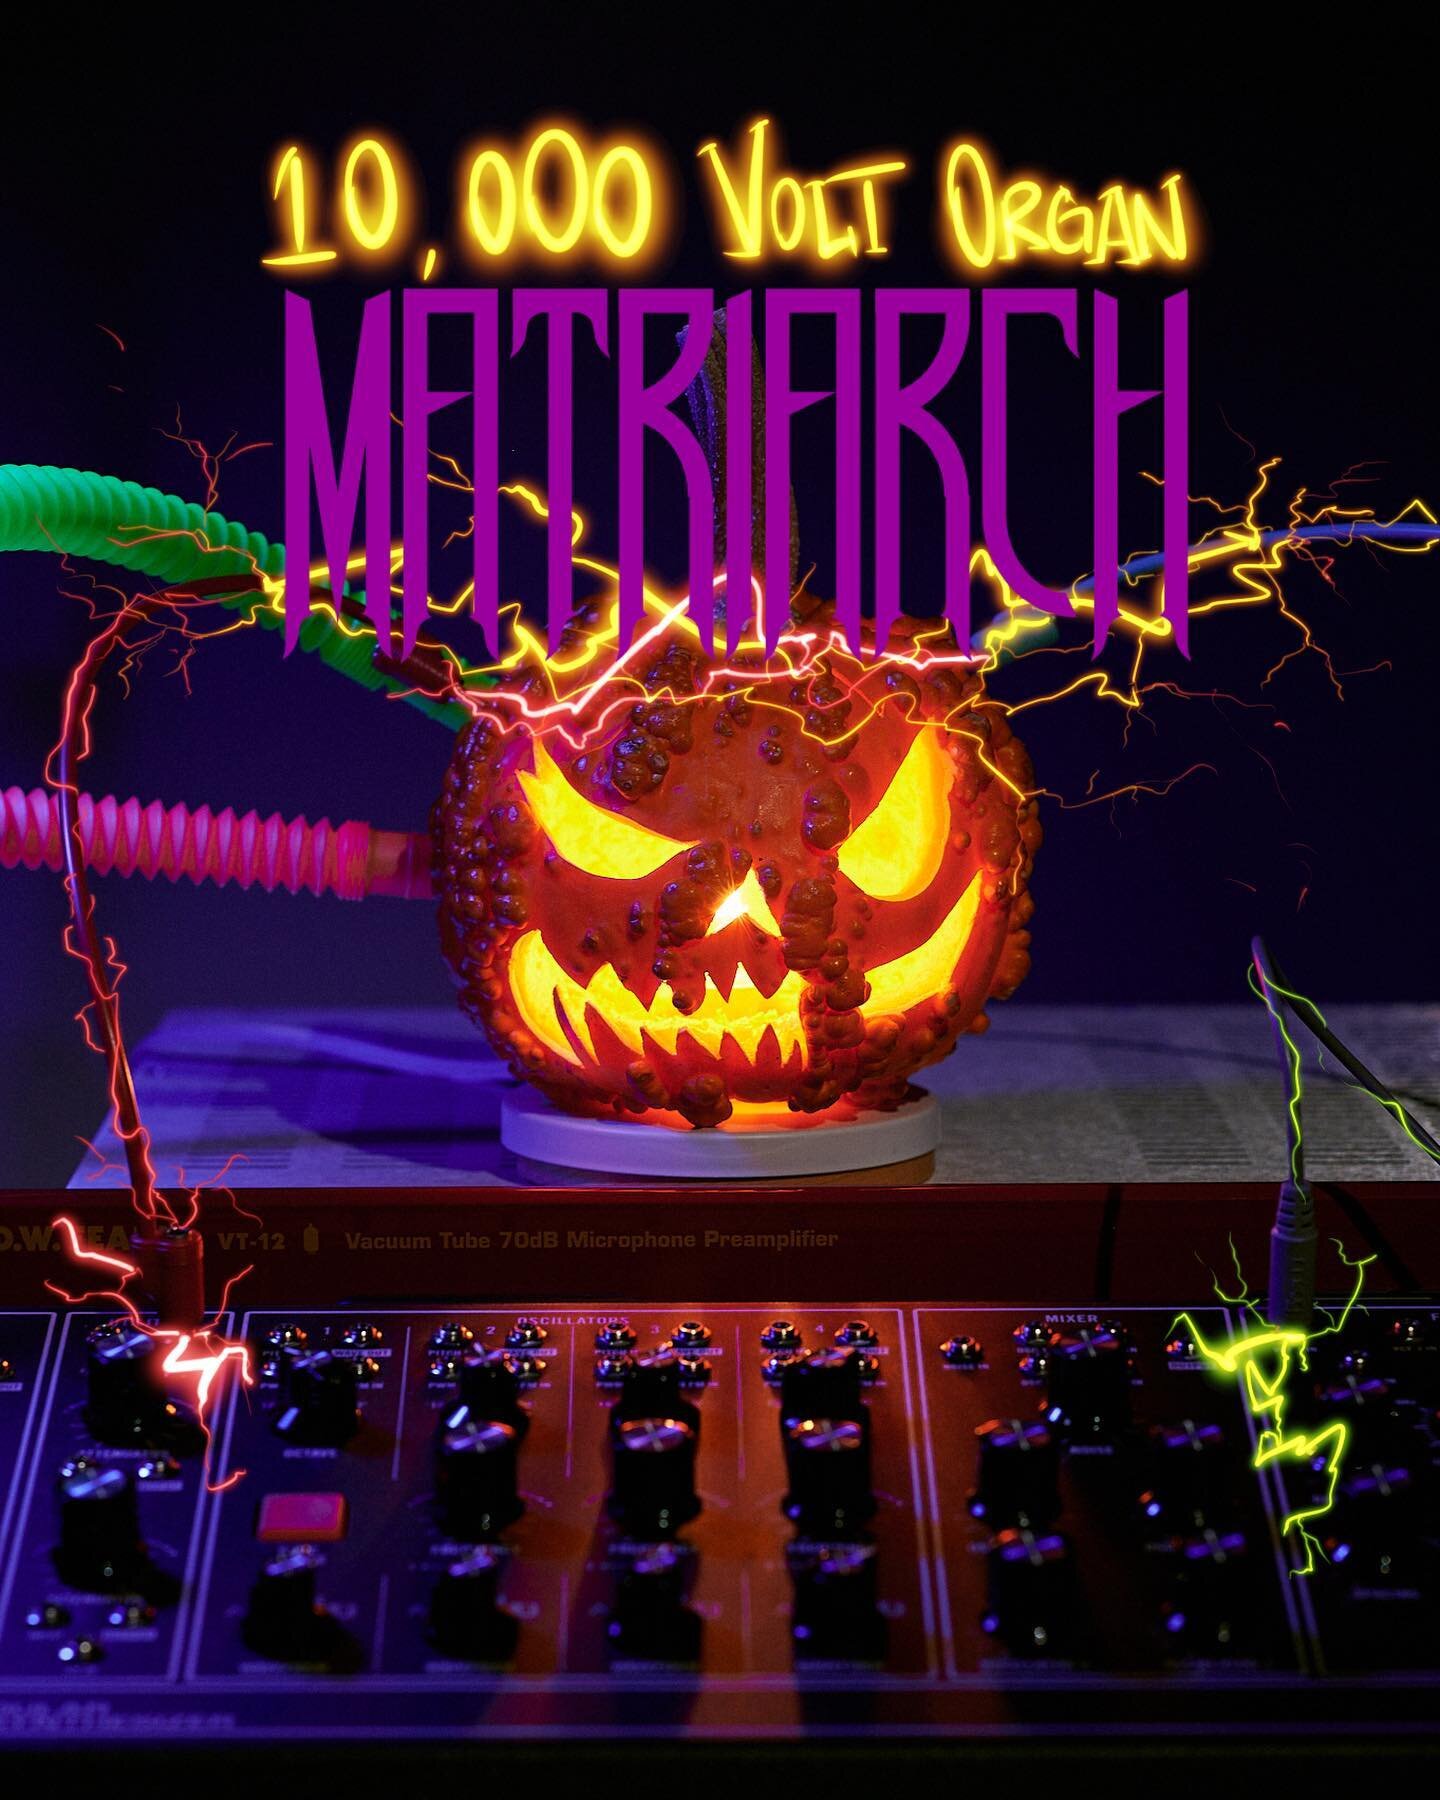 Recreating a pipe organ sound on the @moogsynthesizers Matriarch!

Download the patch, link in bio!

#Akiyamamusic #moog #moogmatriarch #moogsynthesizer #synth #synthwave #halloween #music #musician #composer #filmscore #instagood #style #photography